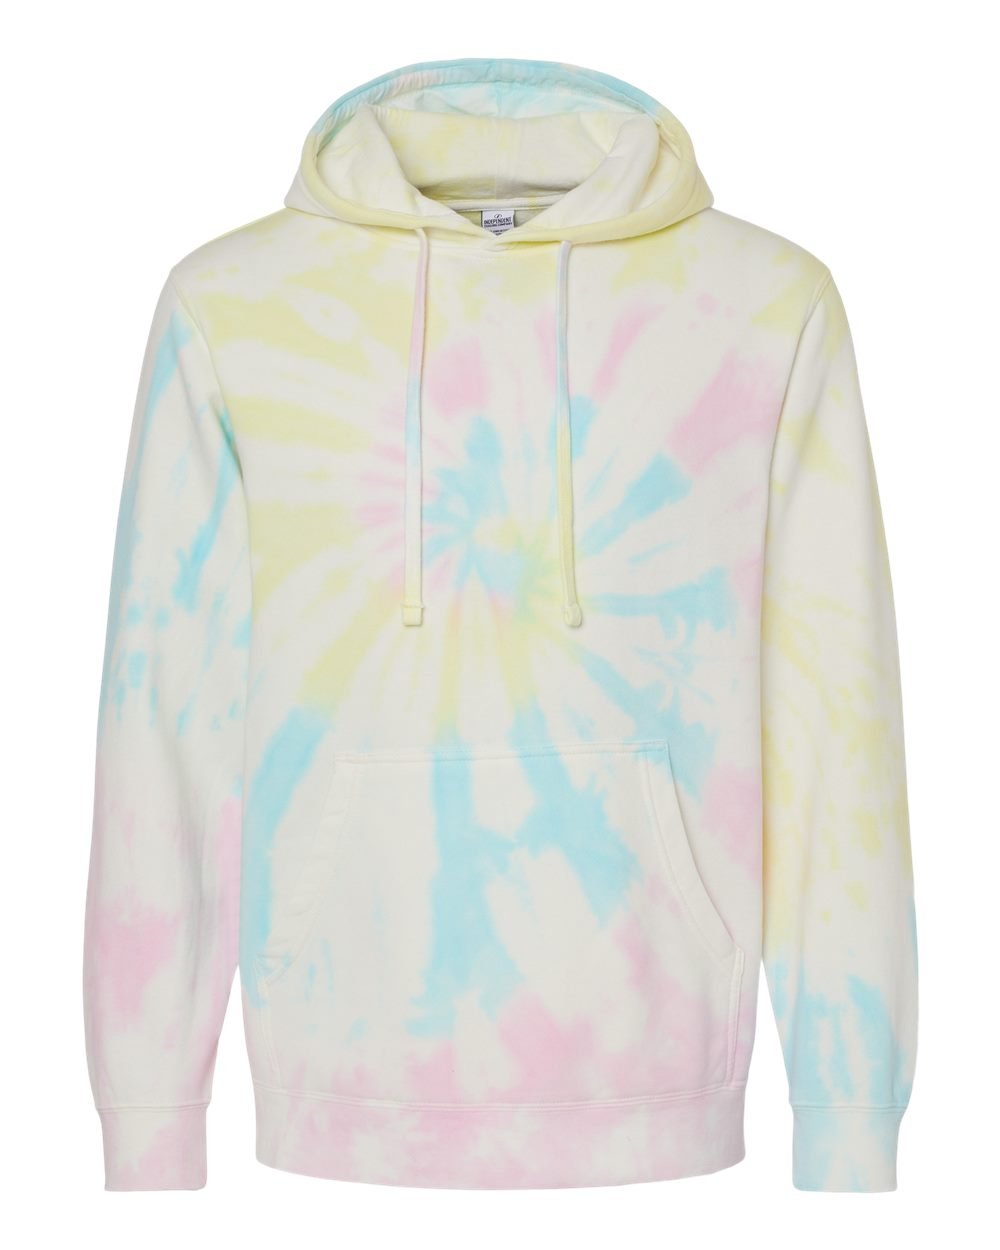 Independent_Trading_Co._PRM4500TD_Tie_Dye_Sunset_Swirl_Front_High.jpg